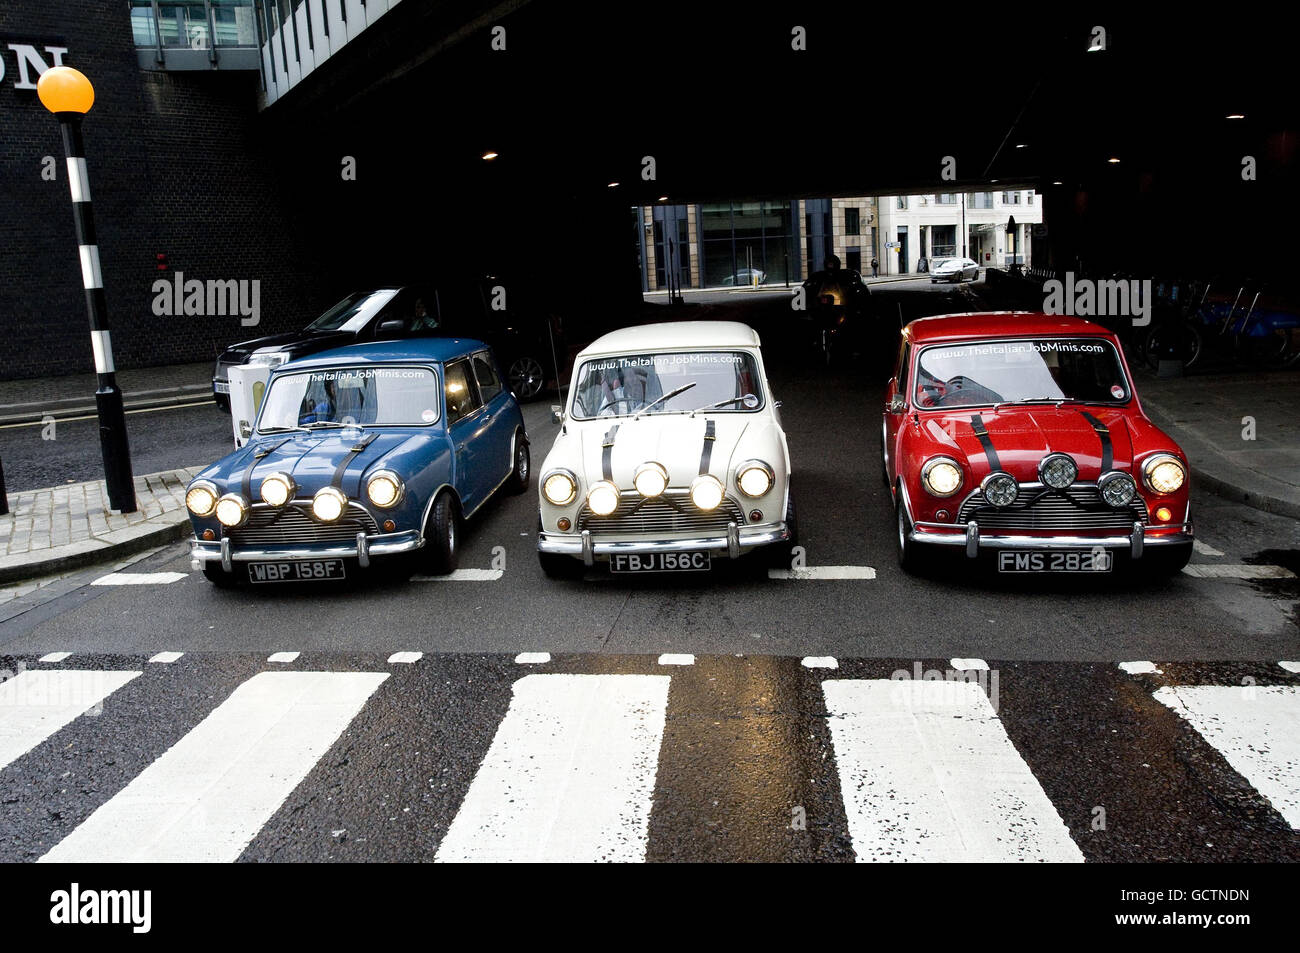 Three original 1960's mini coopers, used by Paramount Pictures to promote the 1969 film The Italian Job, which will go on show at the Museum Of London from today until November 14. Stock Photo